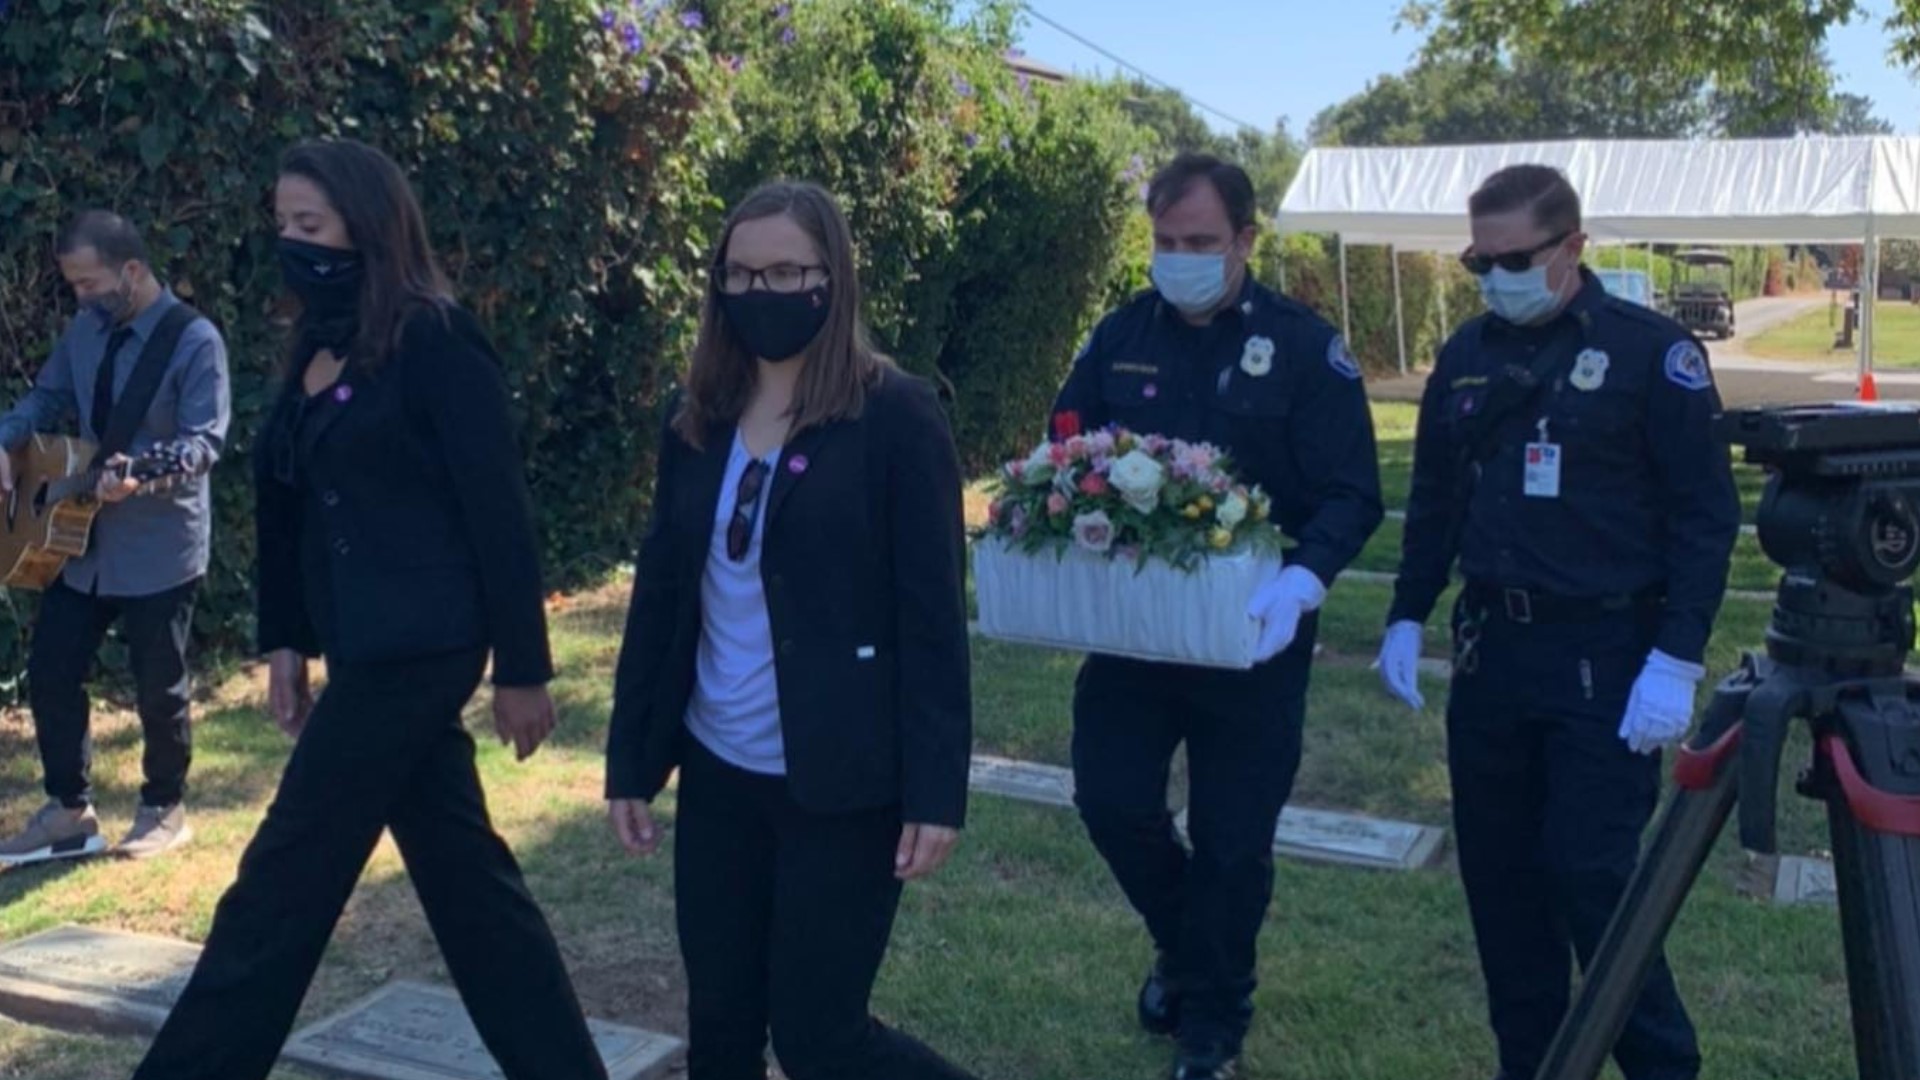 The nonprofit Little Treasures was able to help law enforcement provide the baby with a proper funeral.